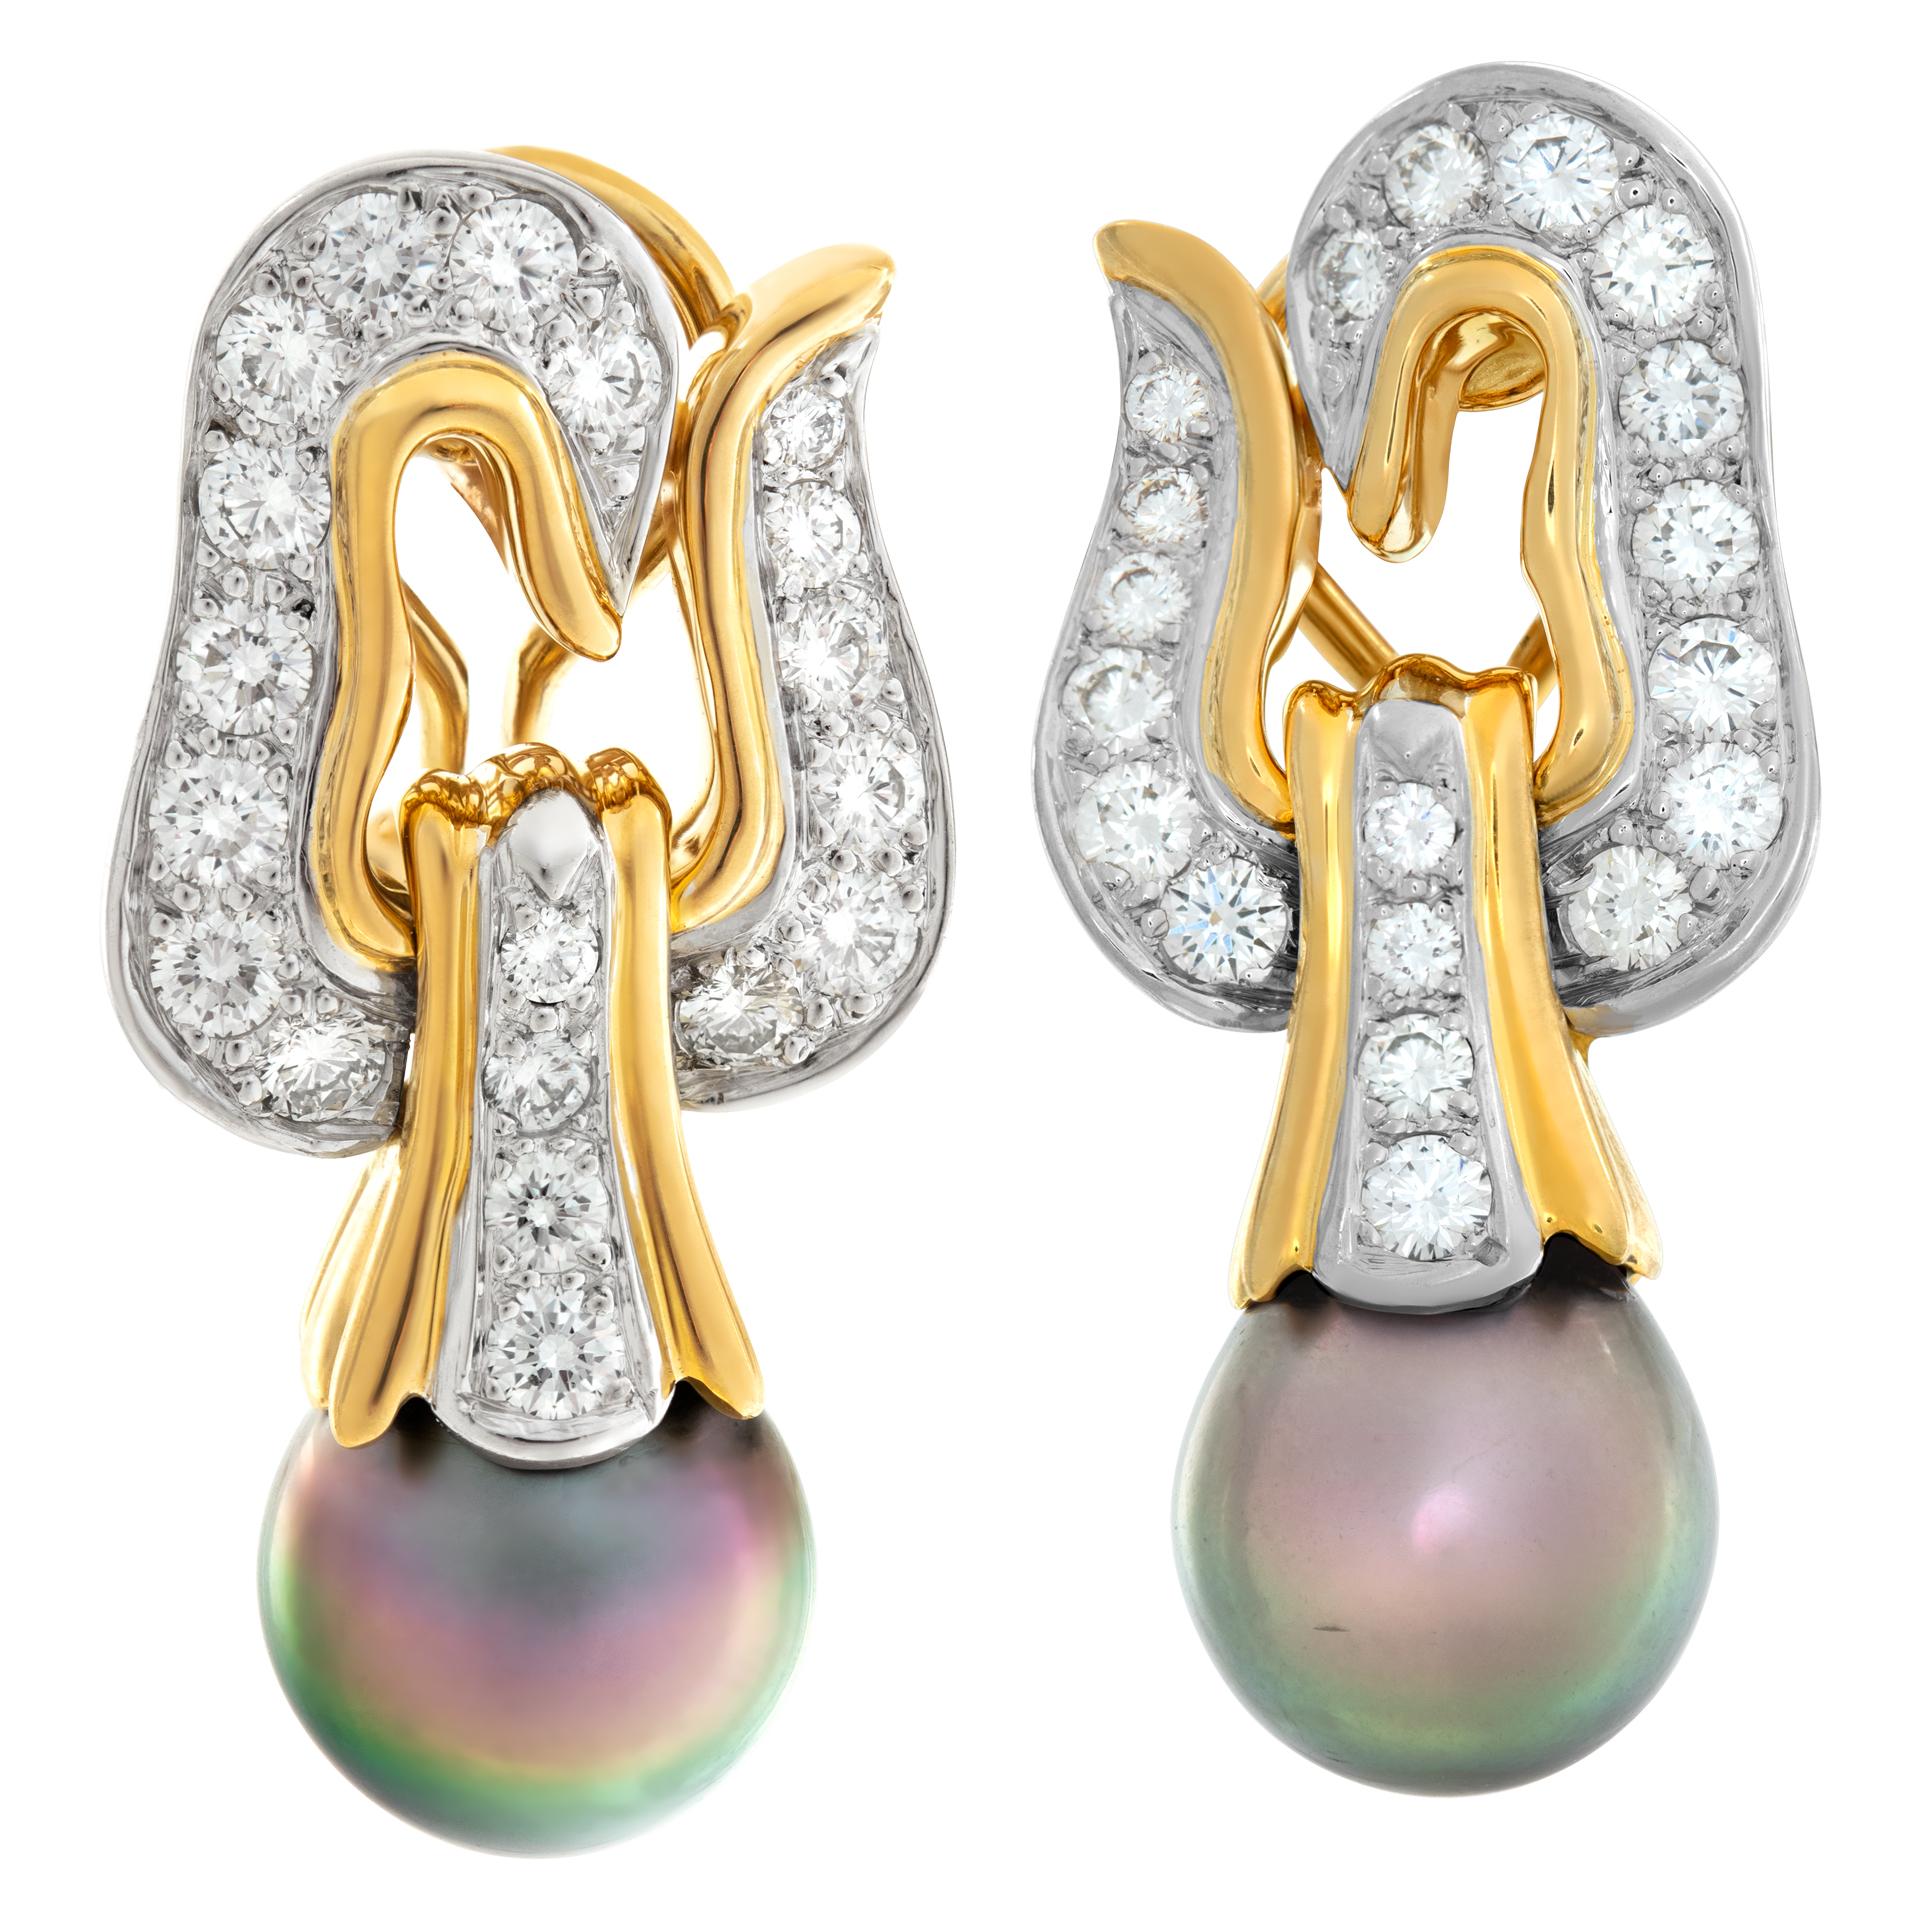 Tiffany & Co. 1999, Angela Cummings Tahitian grey pearl (10 x 10.5mm) and diamonds drop earrings set in 18K yellow gold & Platinum. Round brilliant cut diamonds total approx. weight 2.50 carats, estimate F/G color, VVS/VS clarity. Post/ Omega clip.